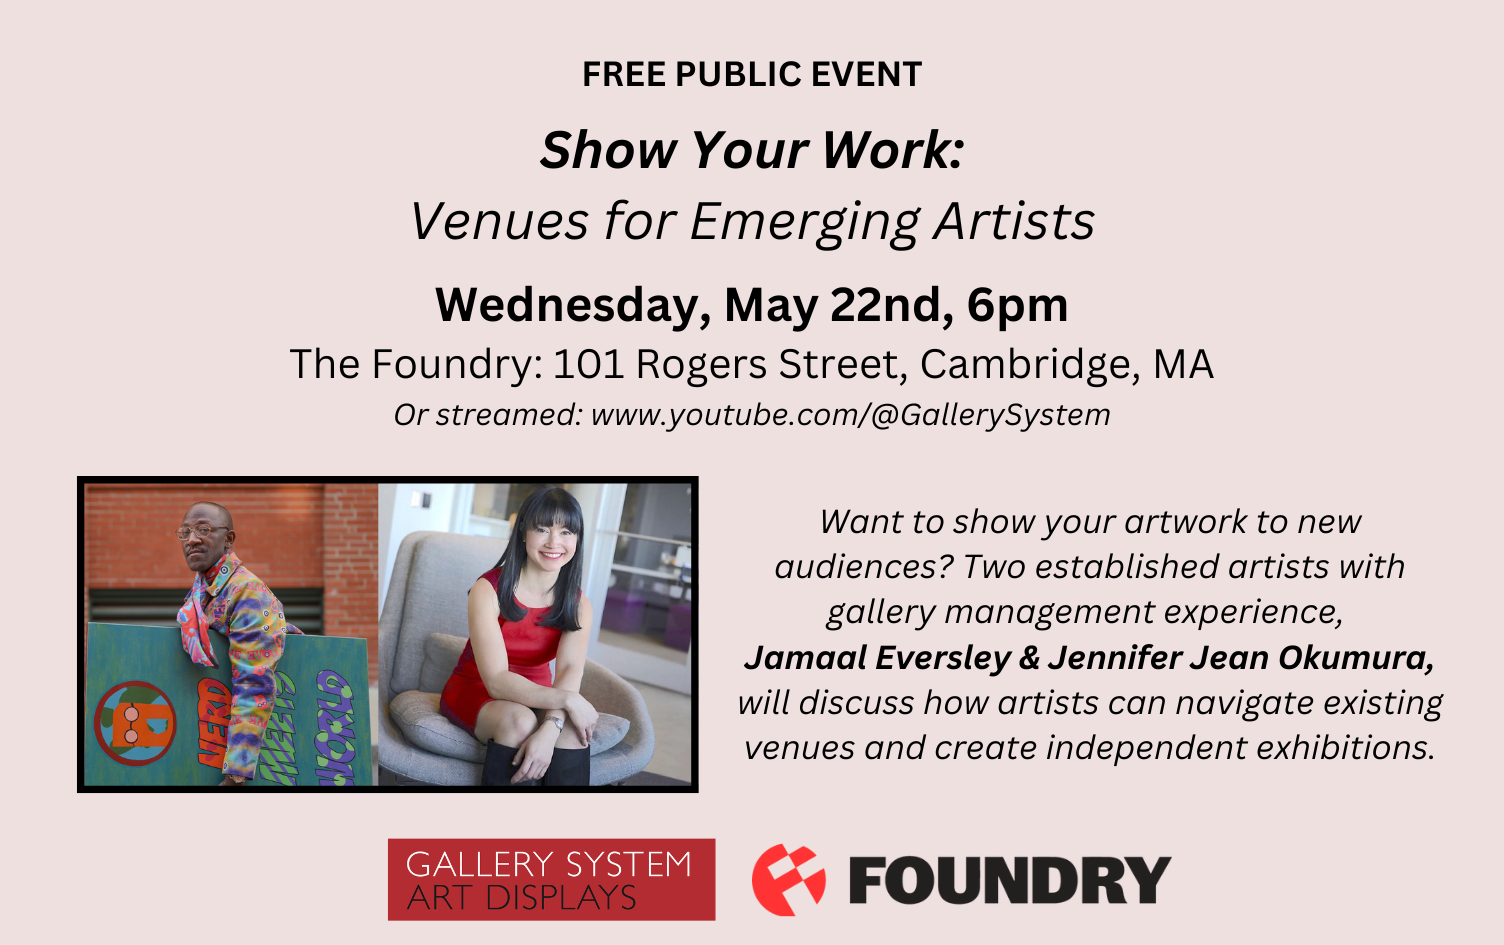 Venues for Emerging Artists Event, May 22, 6pm